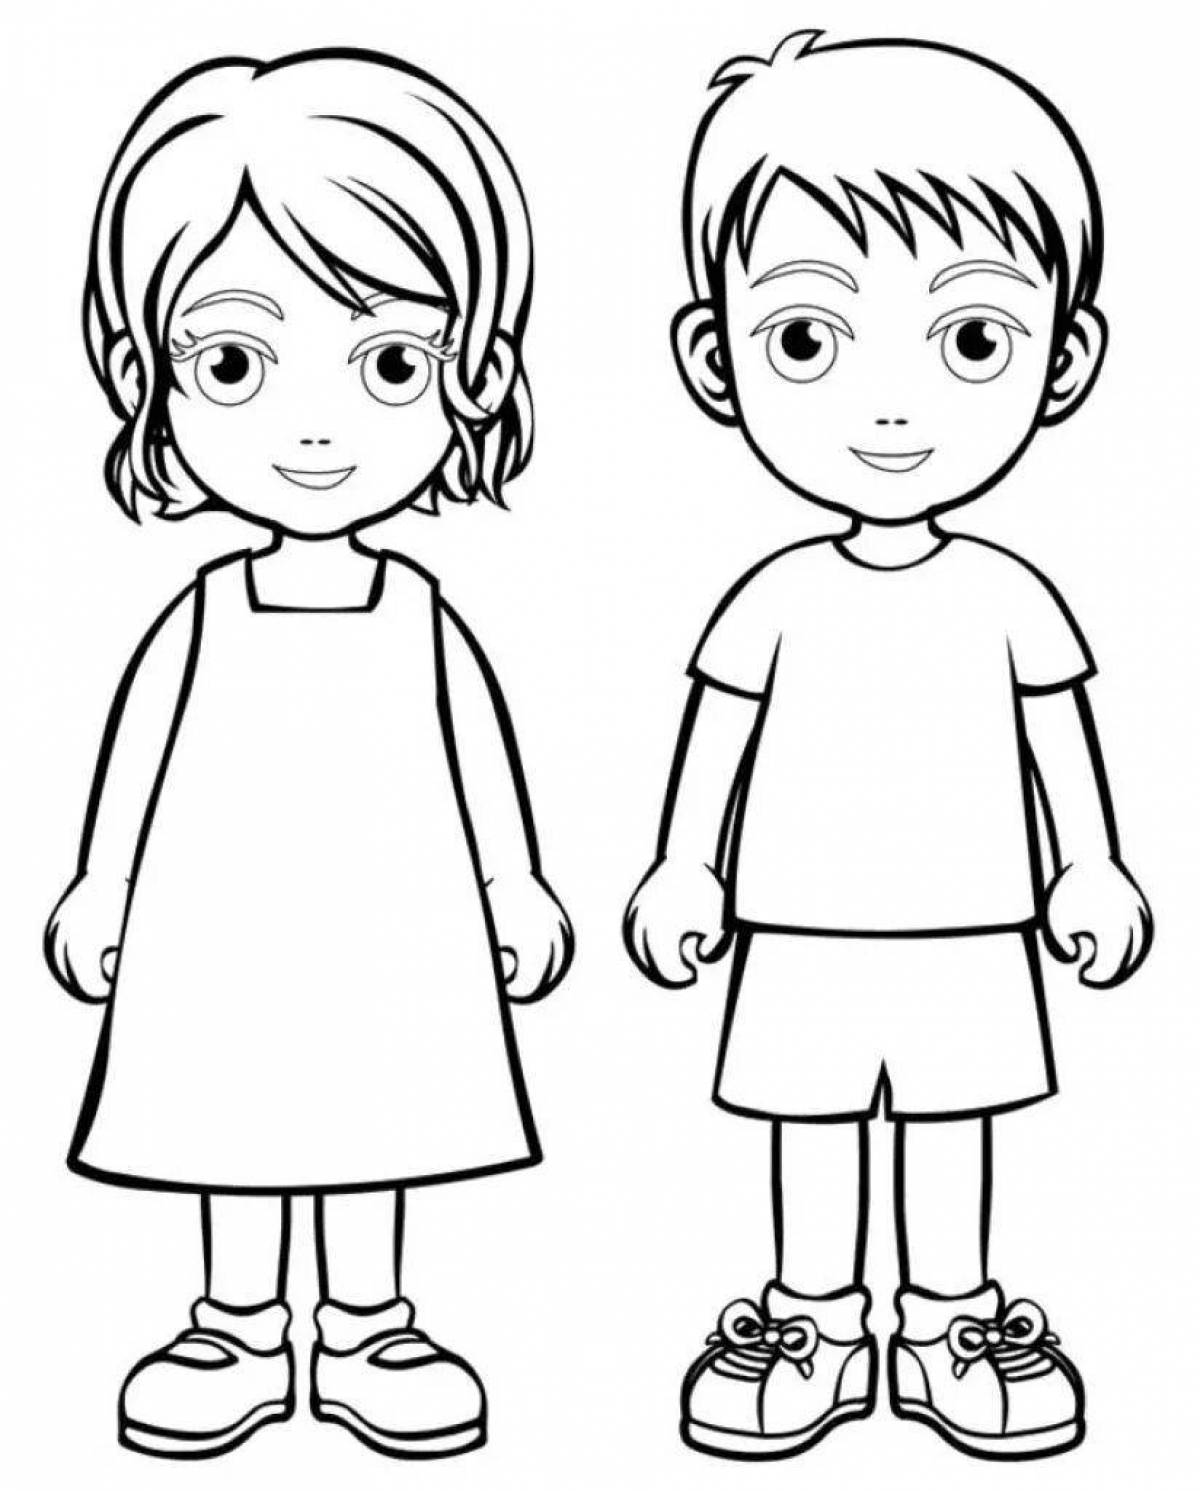 Joyful coloring drawing of a girl and a boy